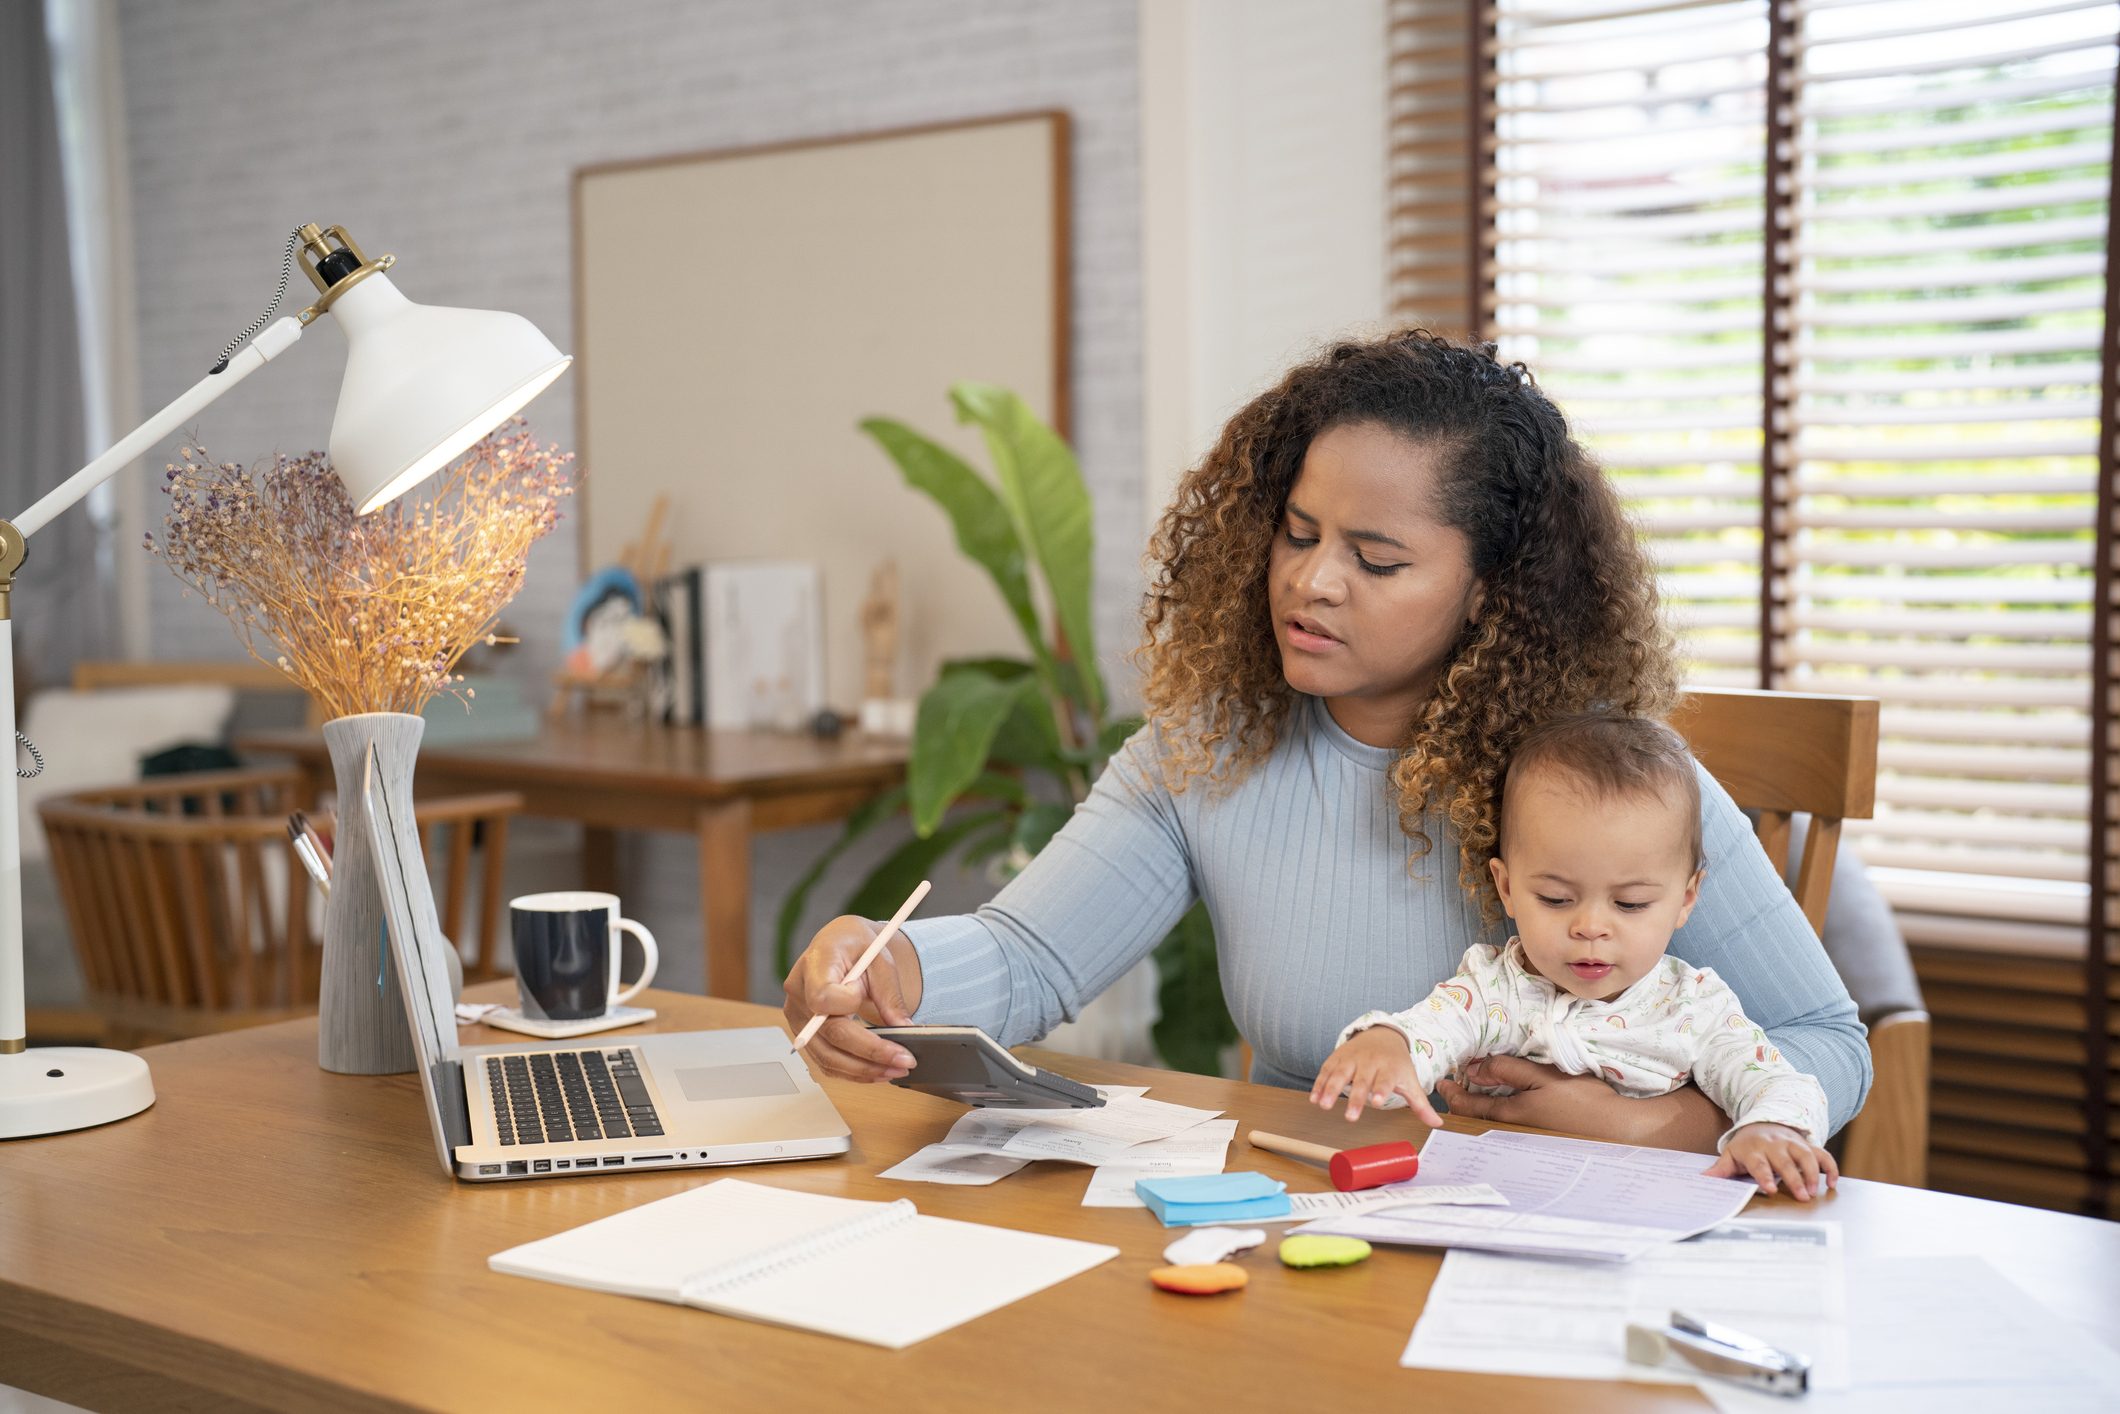 Can You File as Head of Household for Your Taxes?